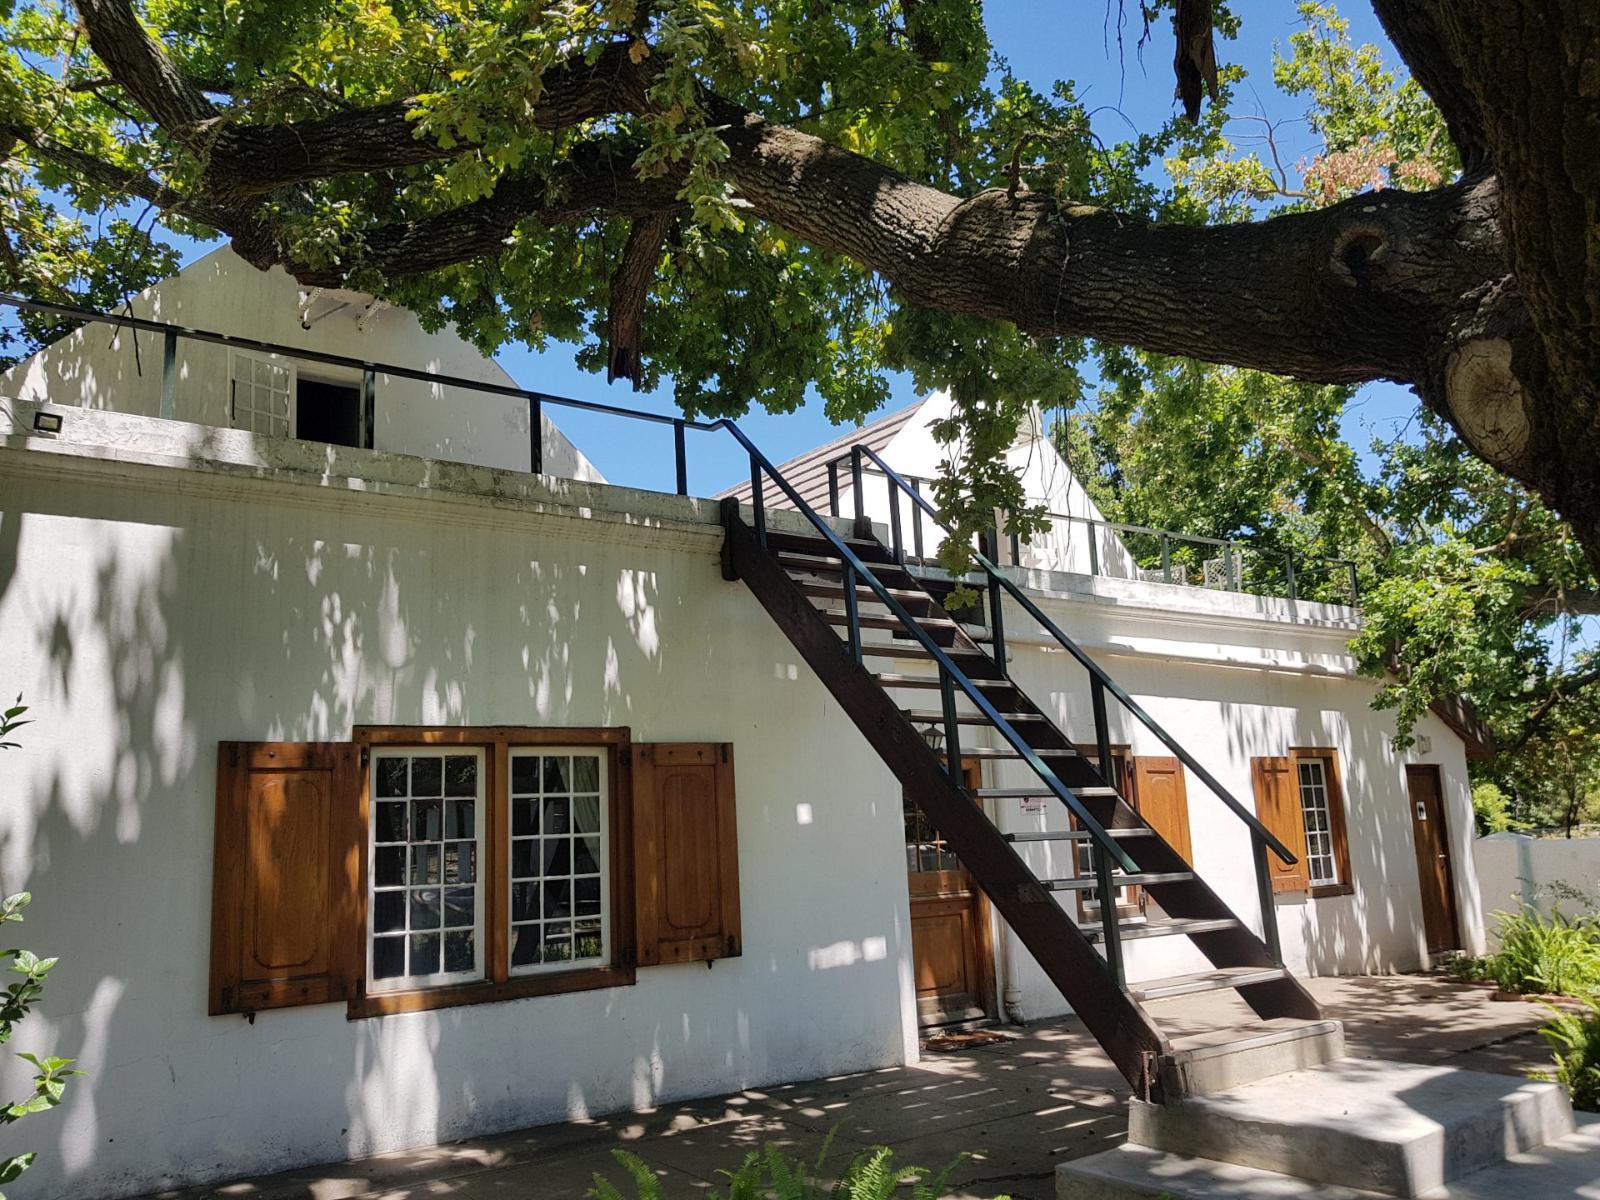 Montpellier De Tulbagh Tulbagh Western Cape South Africa House, Building, Architecture, Window